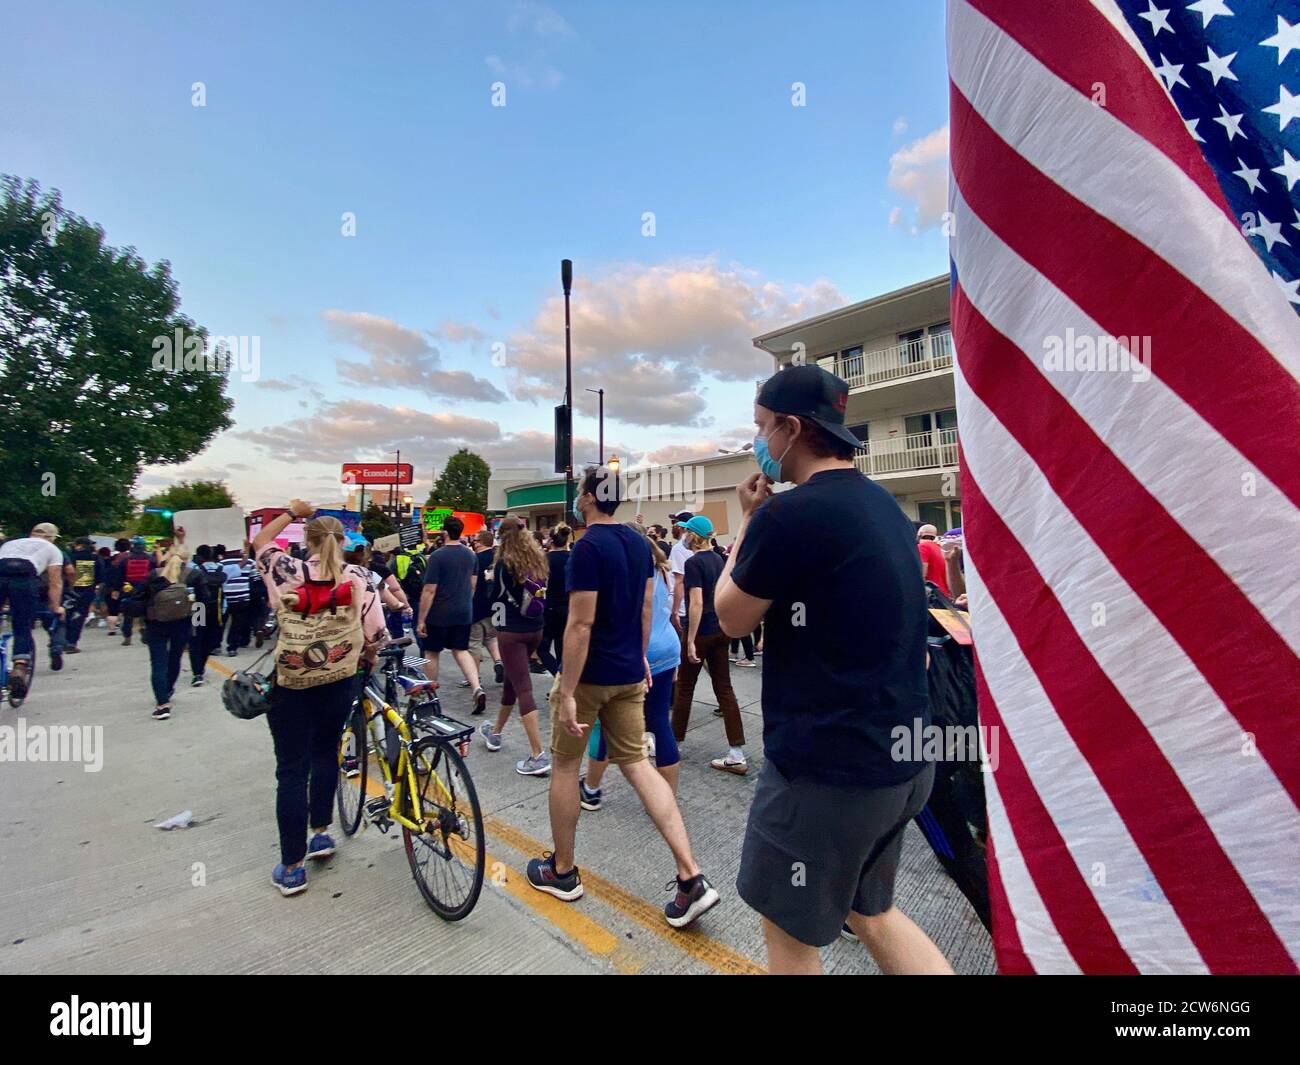 Louisville, Downtown, USA. 27th Sep, 2020. Upside down flag is waived during a march which a thousand or more people attended, demanding Justice for Breonna Taylor and Police Reform. Credit: Amy Katz/ZUMA Wire/Alamy Live News Stock Photo